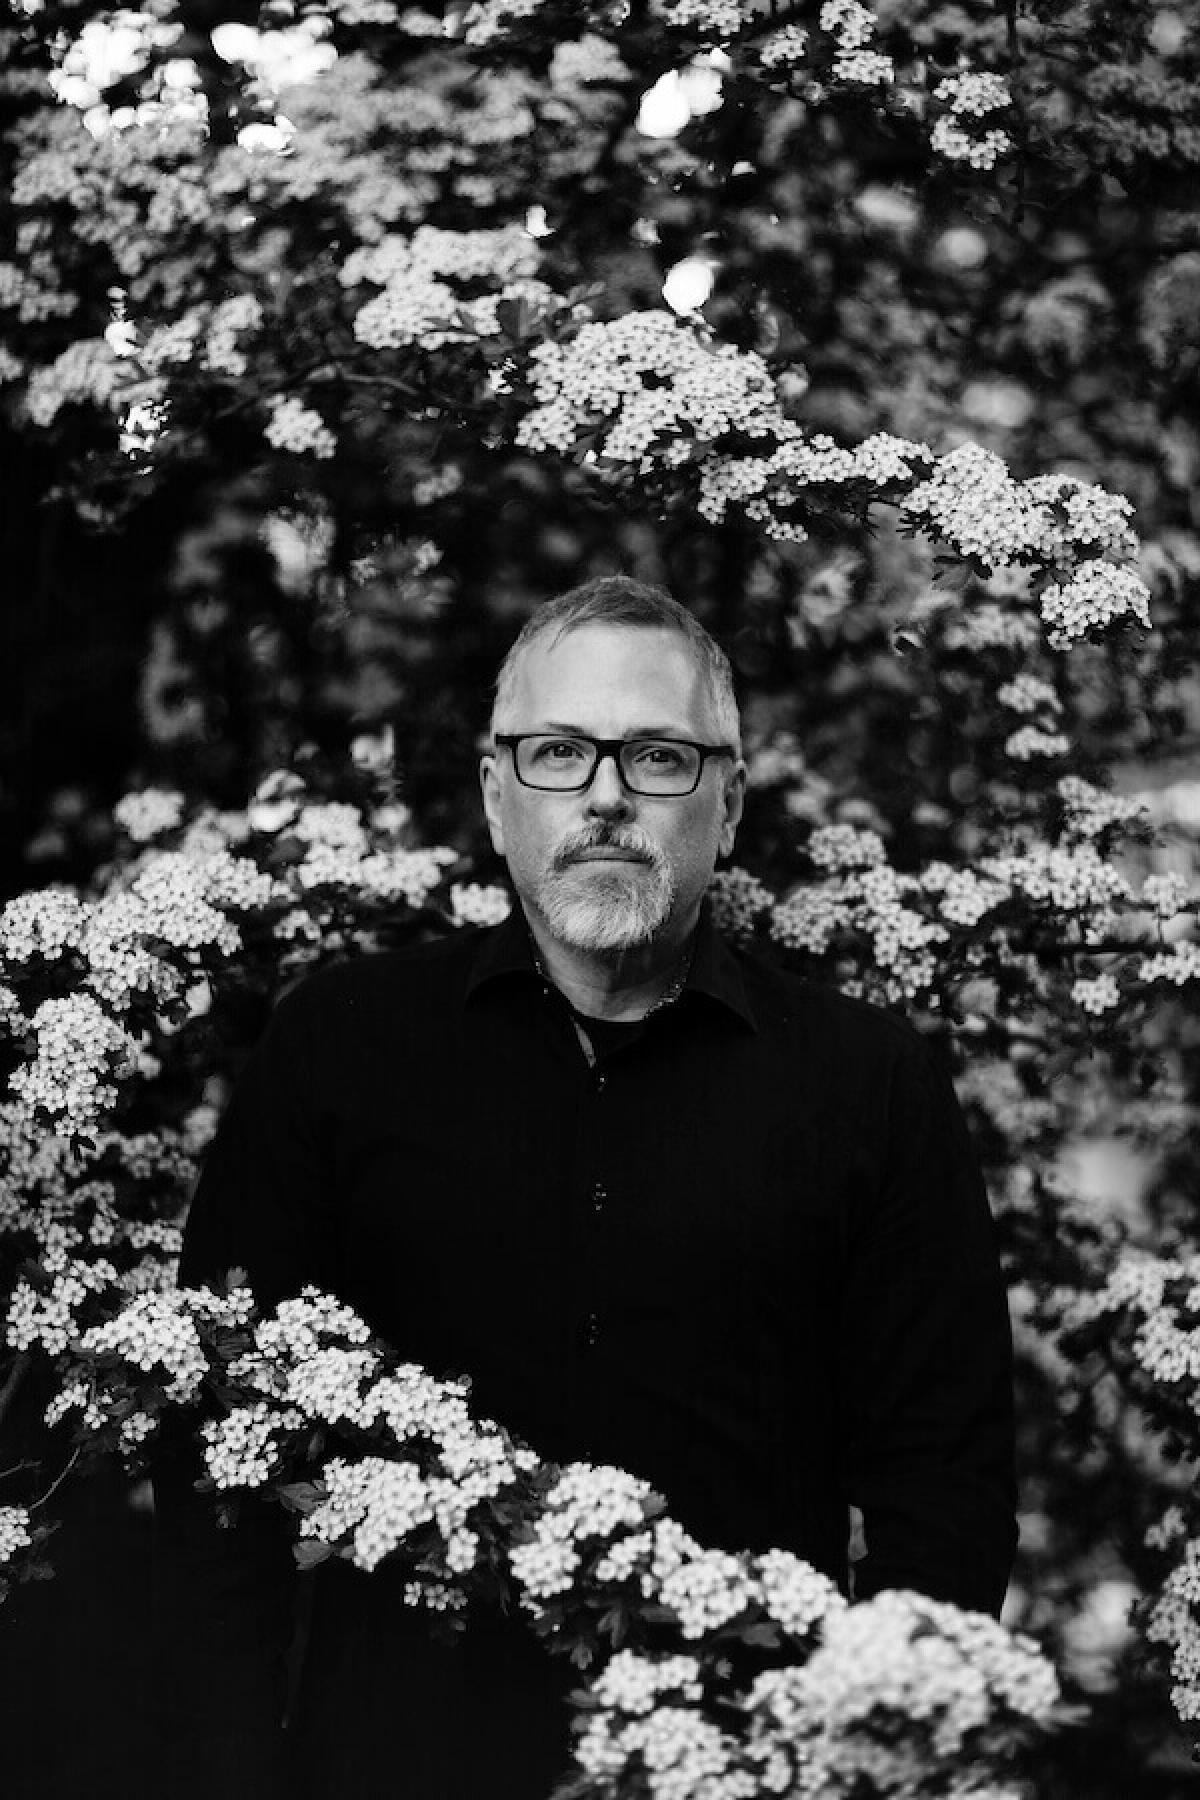 Portrait of a man standing among flowers